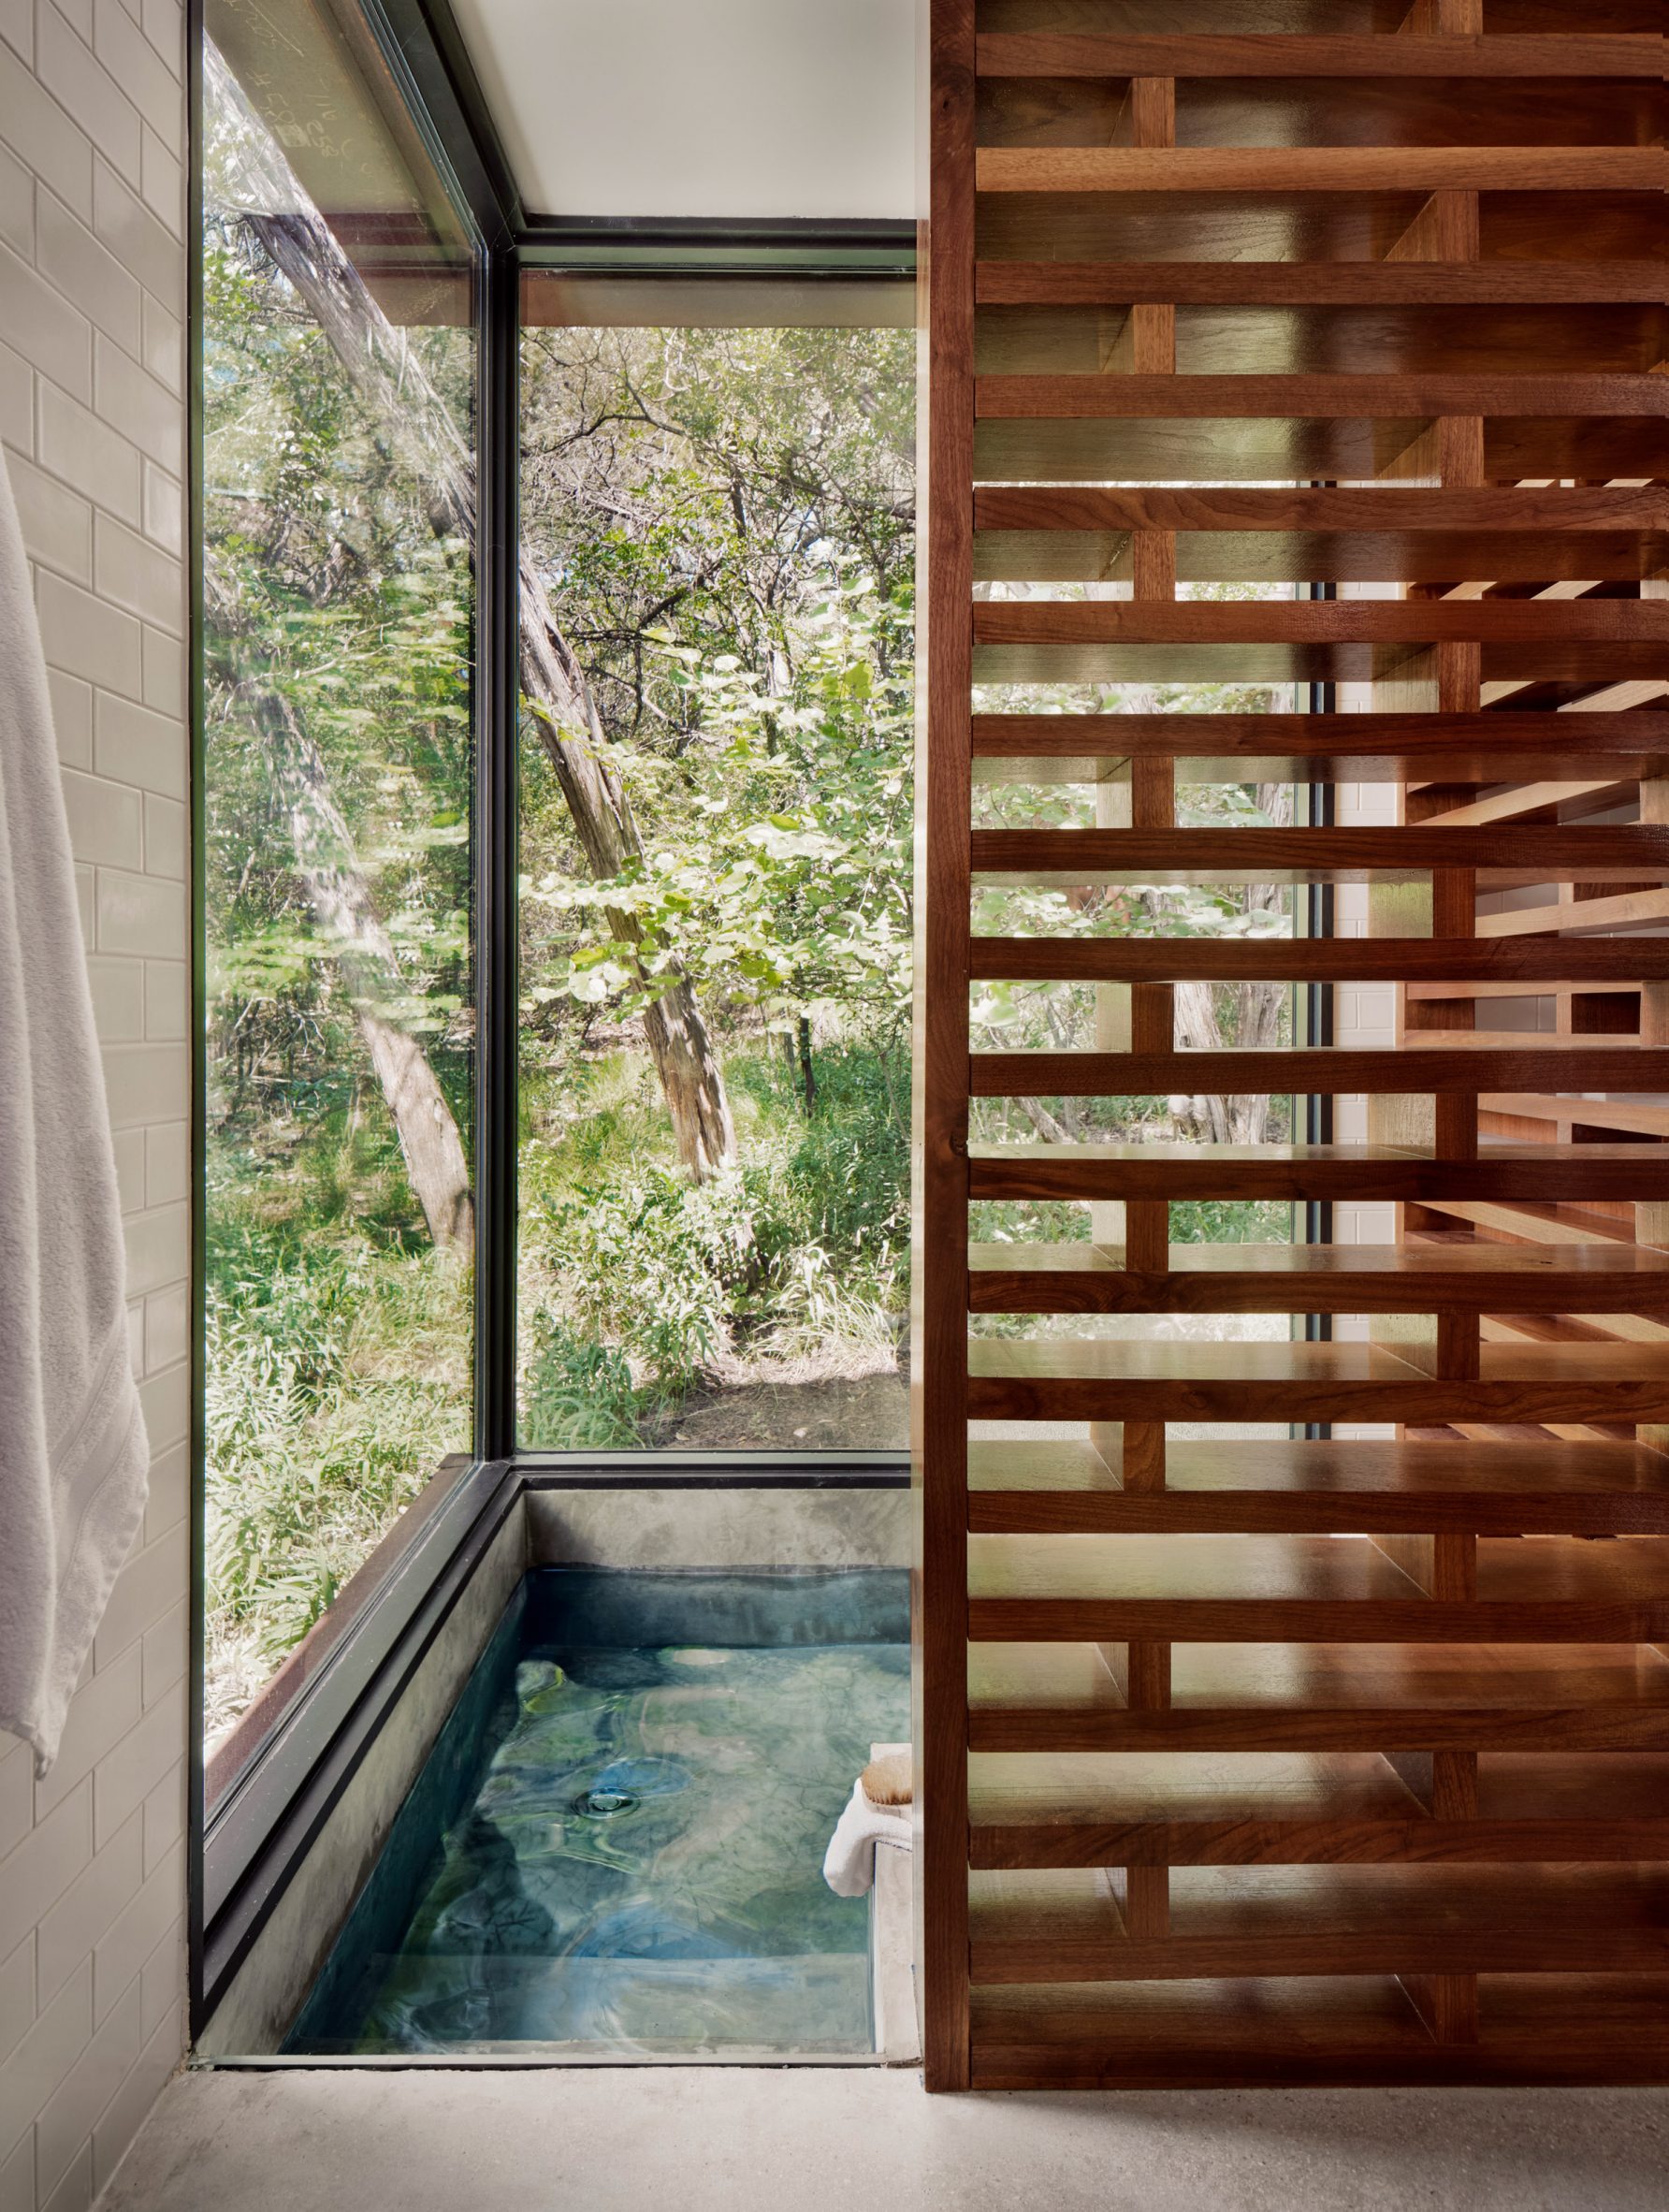 Plunge pool within River Bend Residence